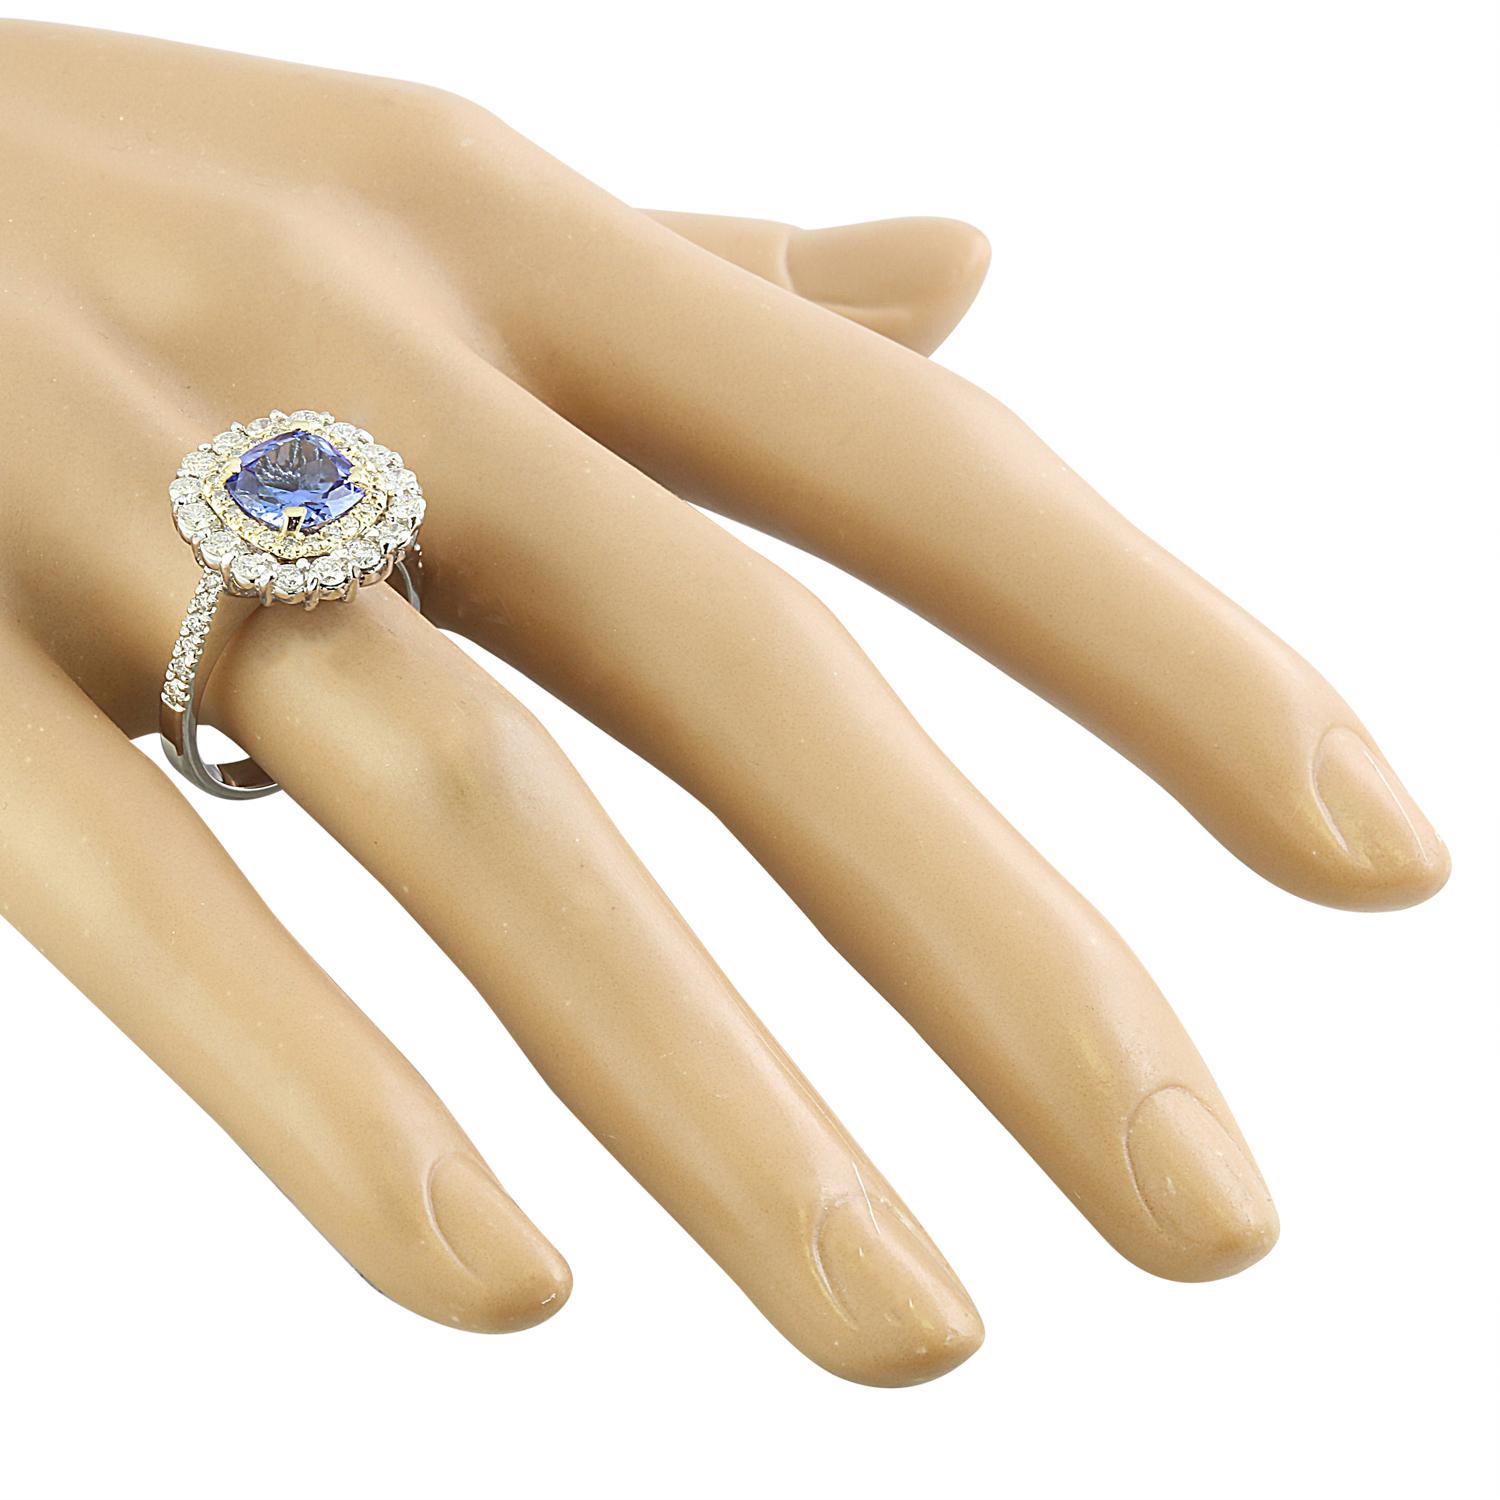 Exquisite Natural Tanzanite Diamond Ring in 14K Two-Tone Gold In New Condition For Sale In Los Angeles, CA